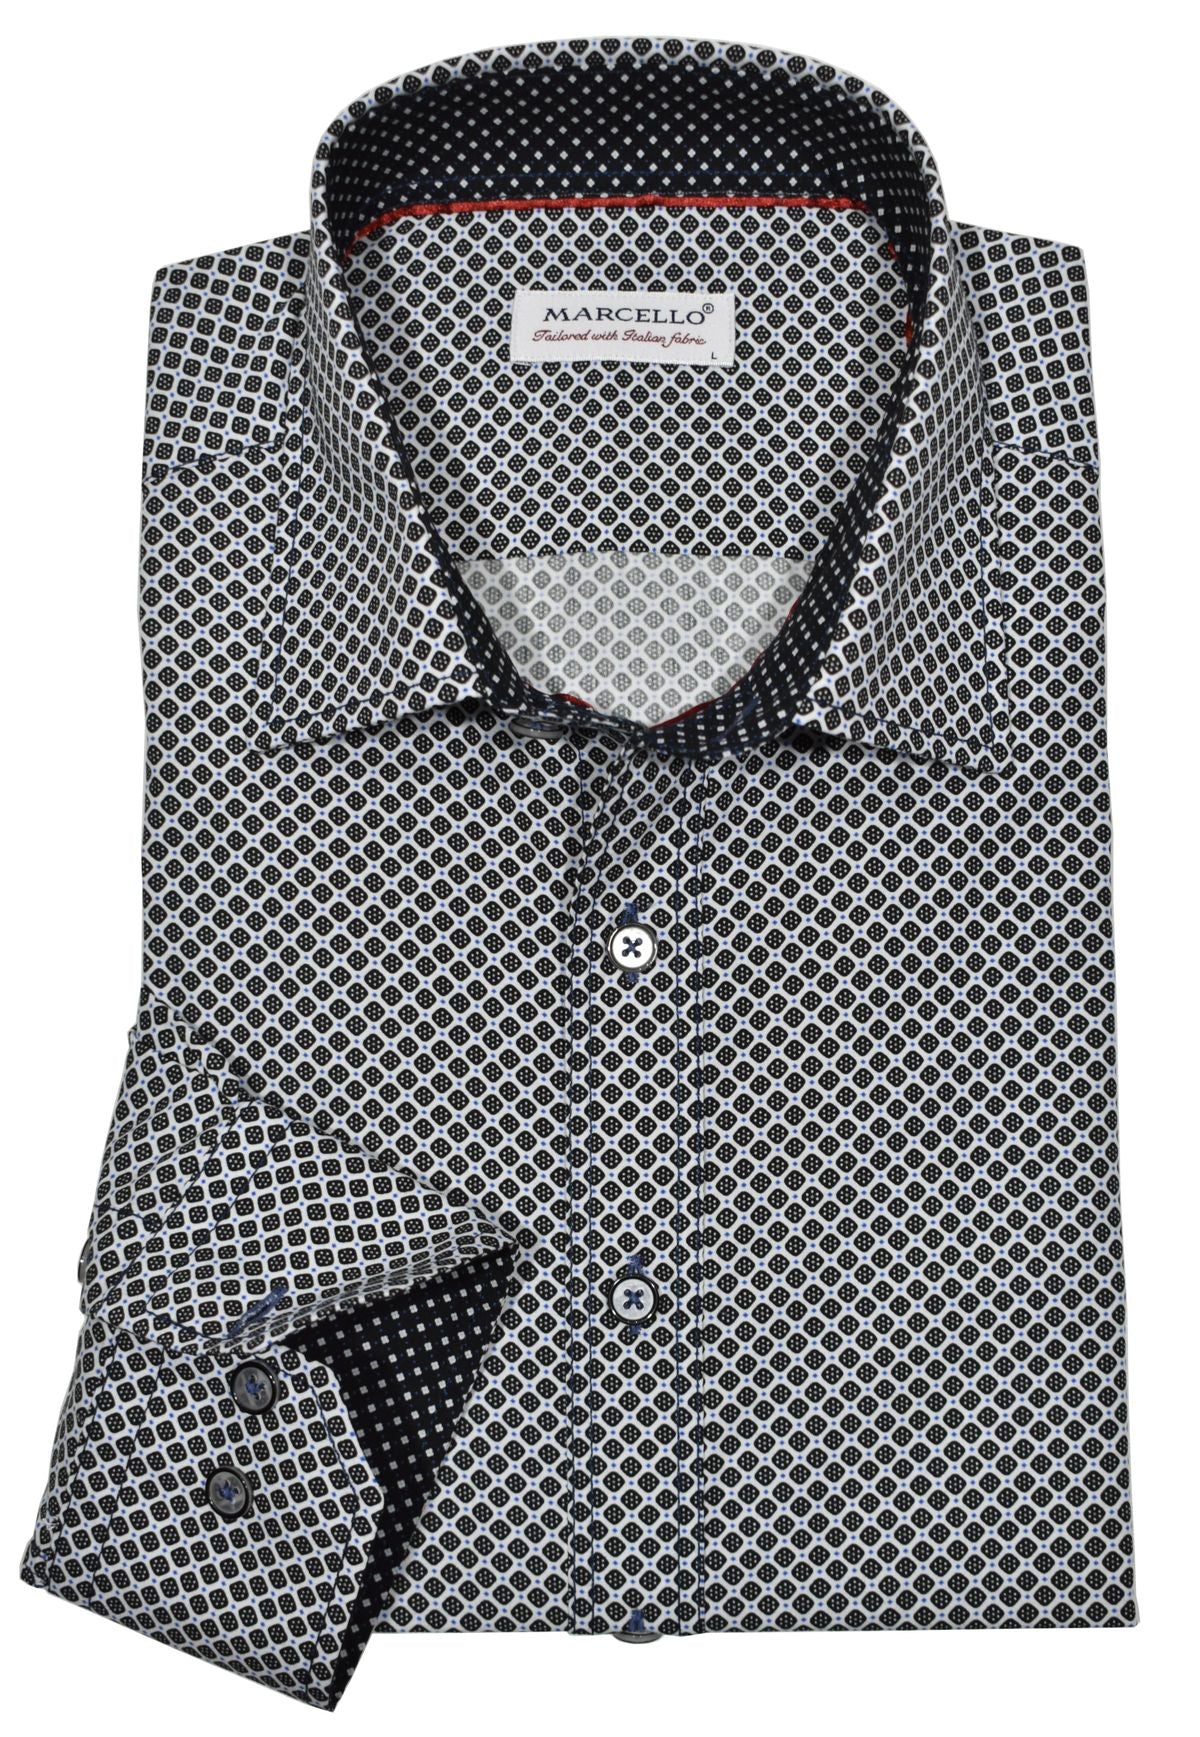 Crafted from soft cotton for an ultra-luxe feel, the unique roll collar stands perfect and looks great alone or under a sport coat. Timeless black and royal dice pattern over a crisp white ground. Elevate your look with contrast stitching, custom buttons and matched trim fabric.  Roll collar shirt by Marcello.